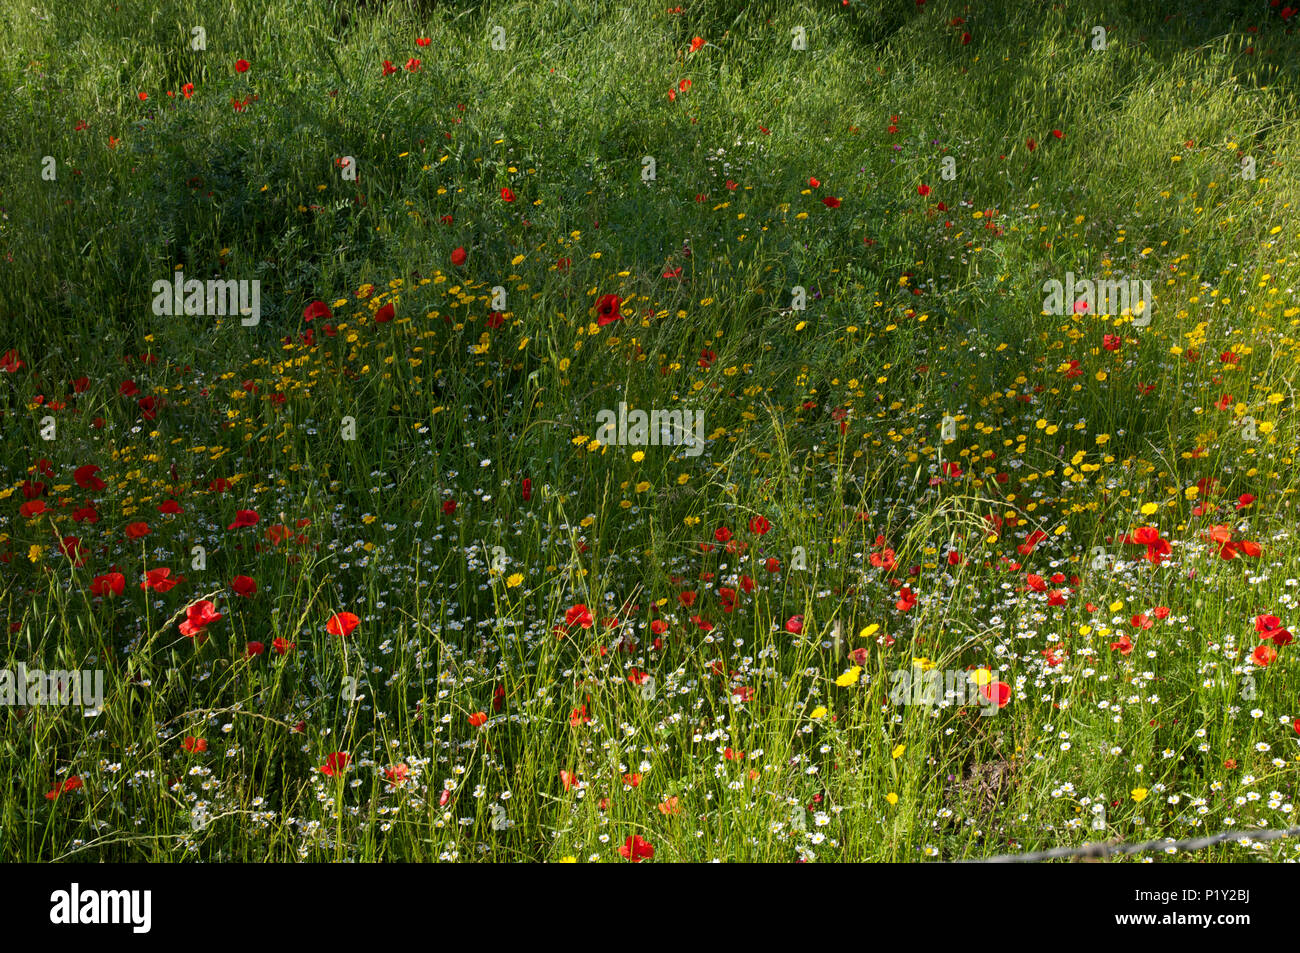 bright red poppies in wild flower meadow Stock Photo